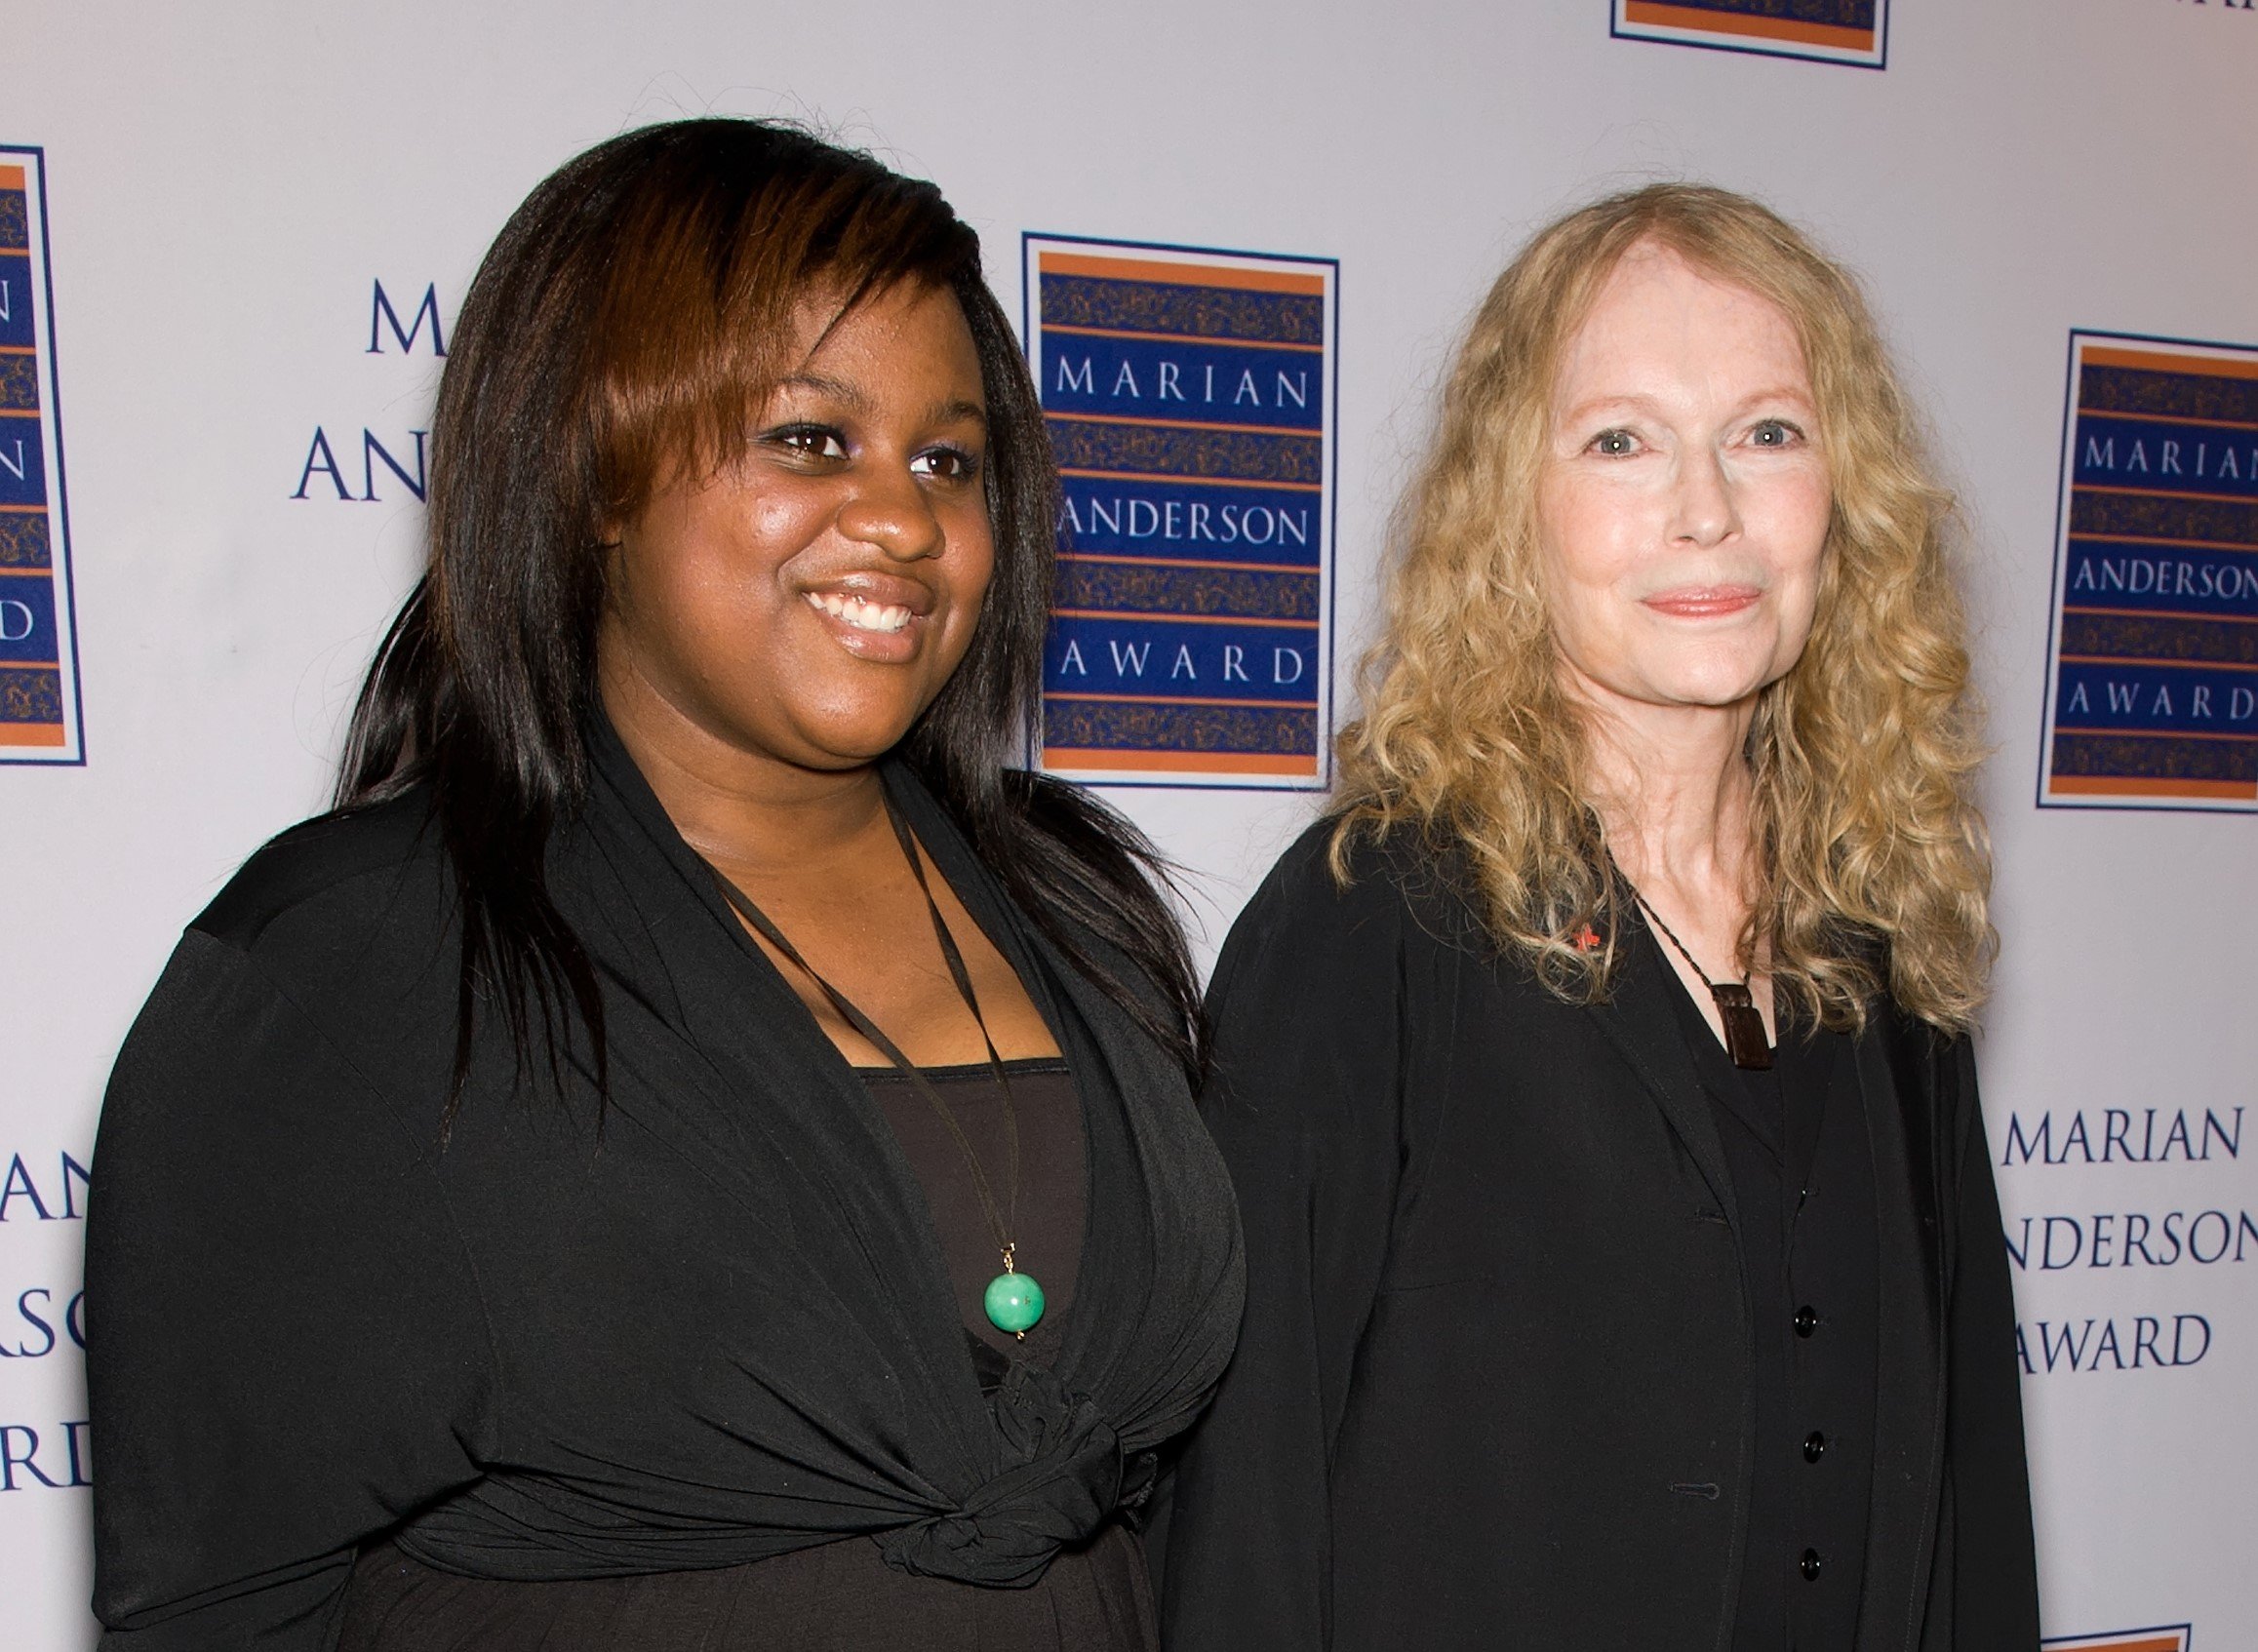 Mia Farrow and daughter Quincy Farrow at the 2011 Marian Anderson Award Gala honoring Mia Farrow in 2011 in Philadelphia. | Source: Getty Images